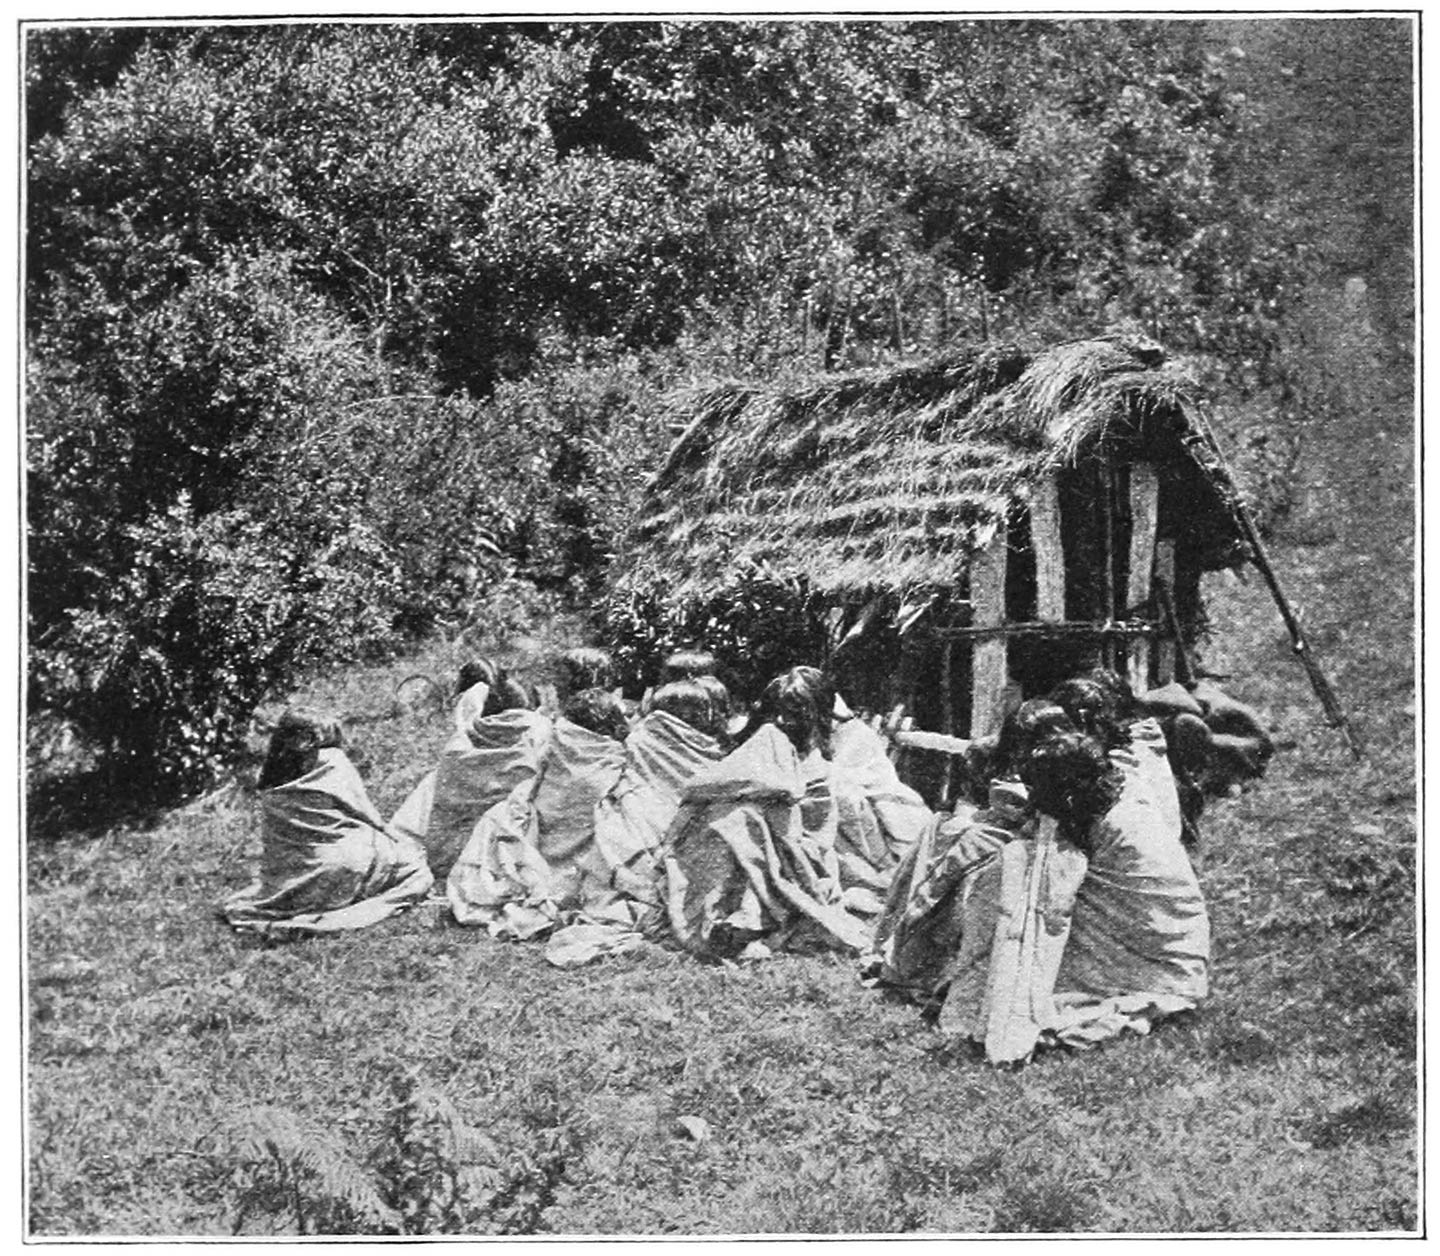 FIG. 48.—FUNERAL HUT ROUND WHICH WOMEN ARE LAMENTING. SEVERAL PAIRS ARE PRESSING THEIR FOREHEADS TOGETHER. THE HUT IS NOT WITHIN A STONE CIRCLE, SHOWING THAT THE FUNERAL IS NOT BEING HELD AT AN OLD FUNERAL PLACE.